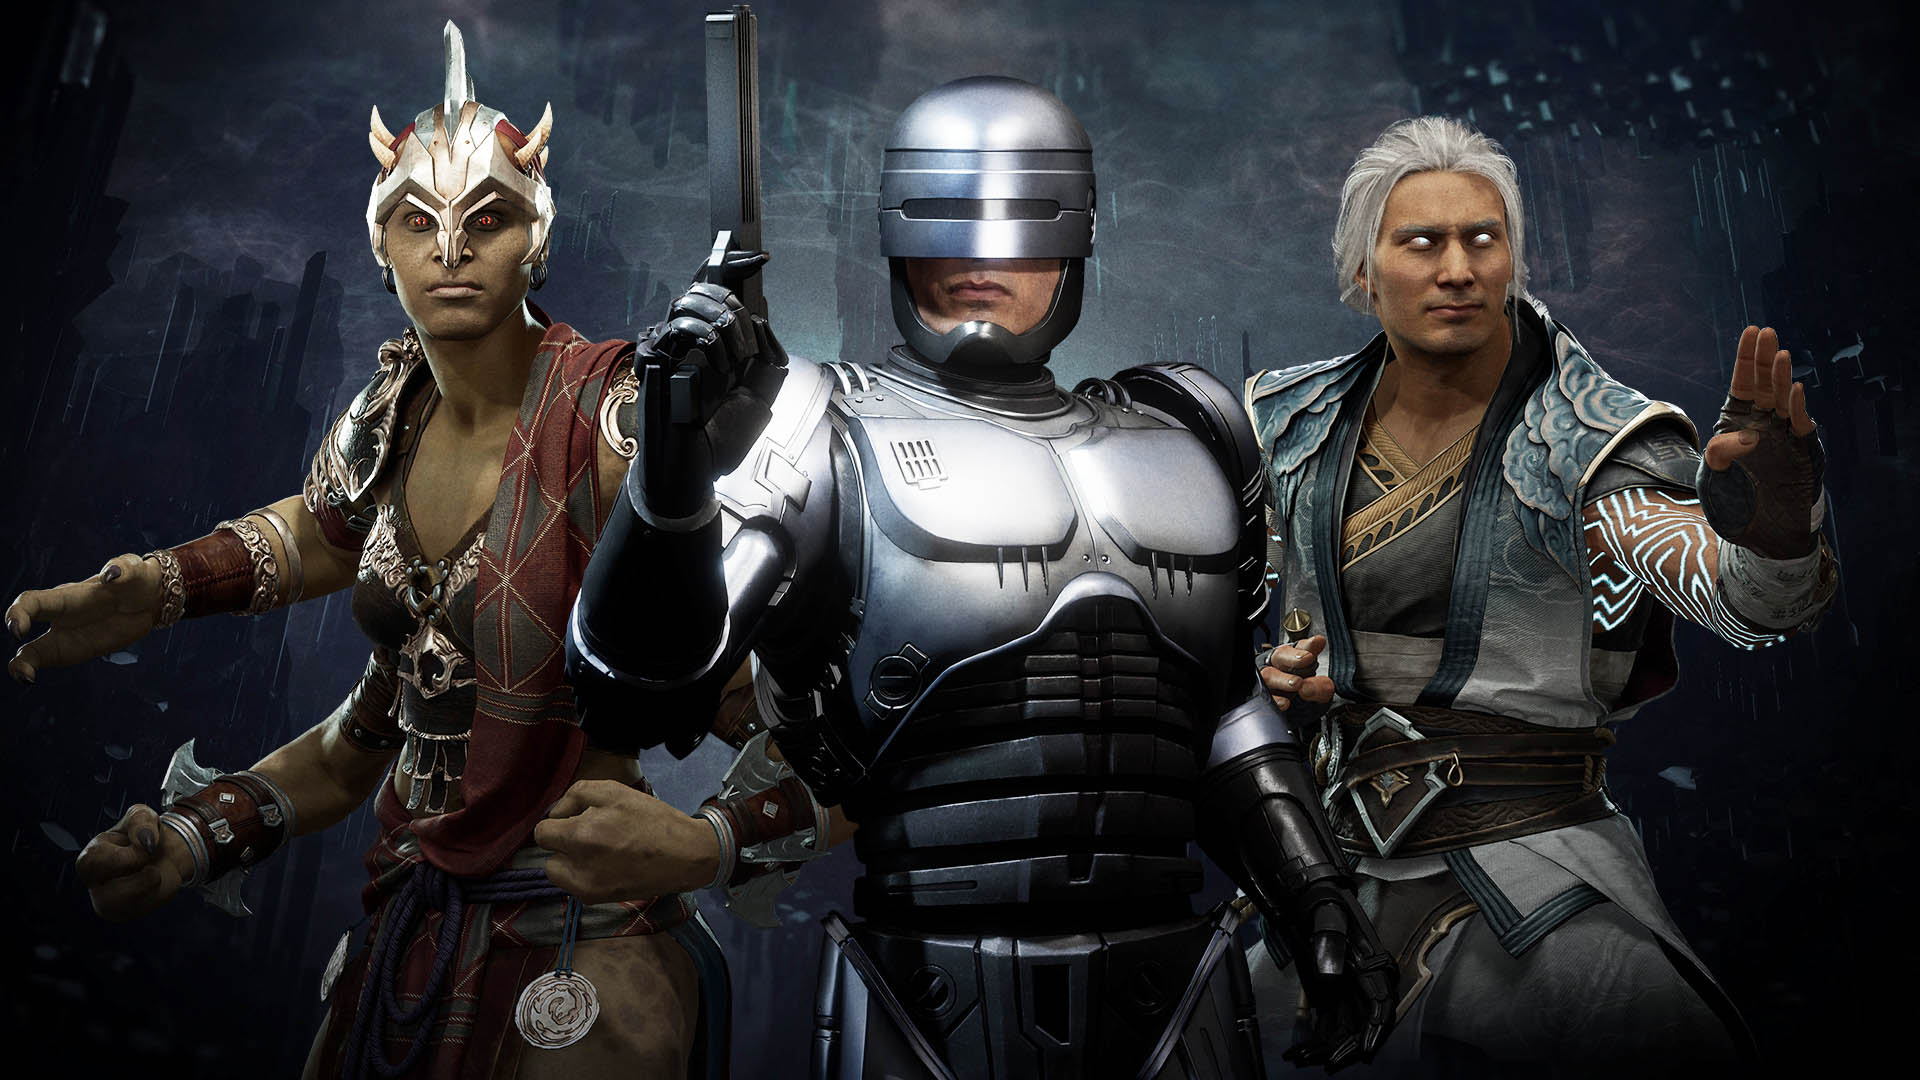 Image for Mortal Kombat 11 Aftermath expansion continues the story, adds Robocop and costs $40